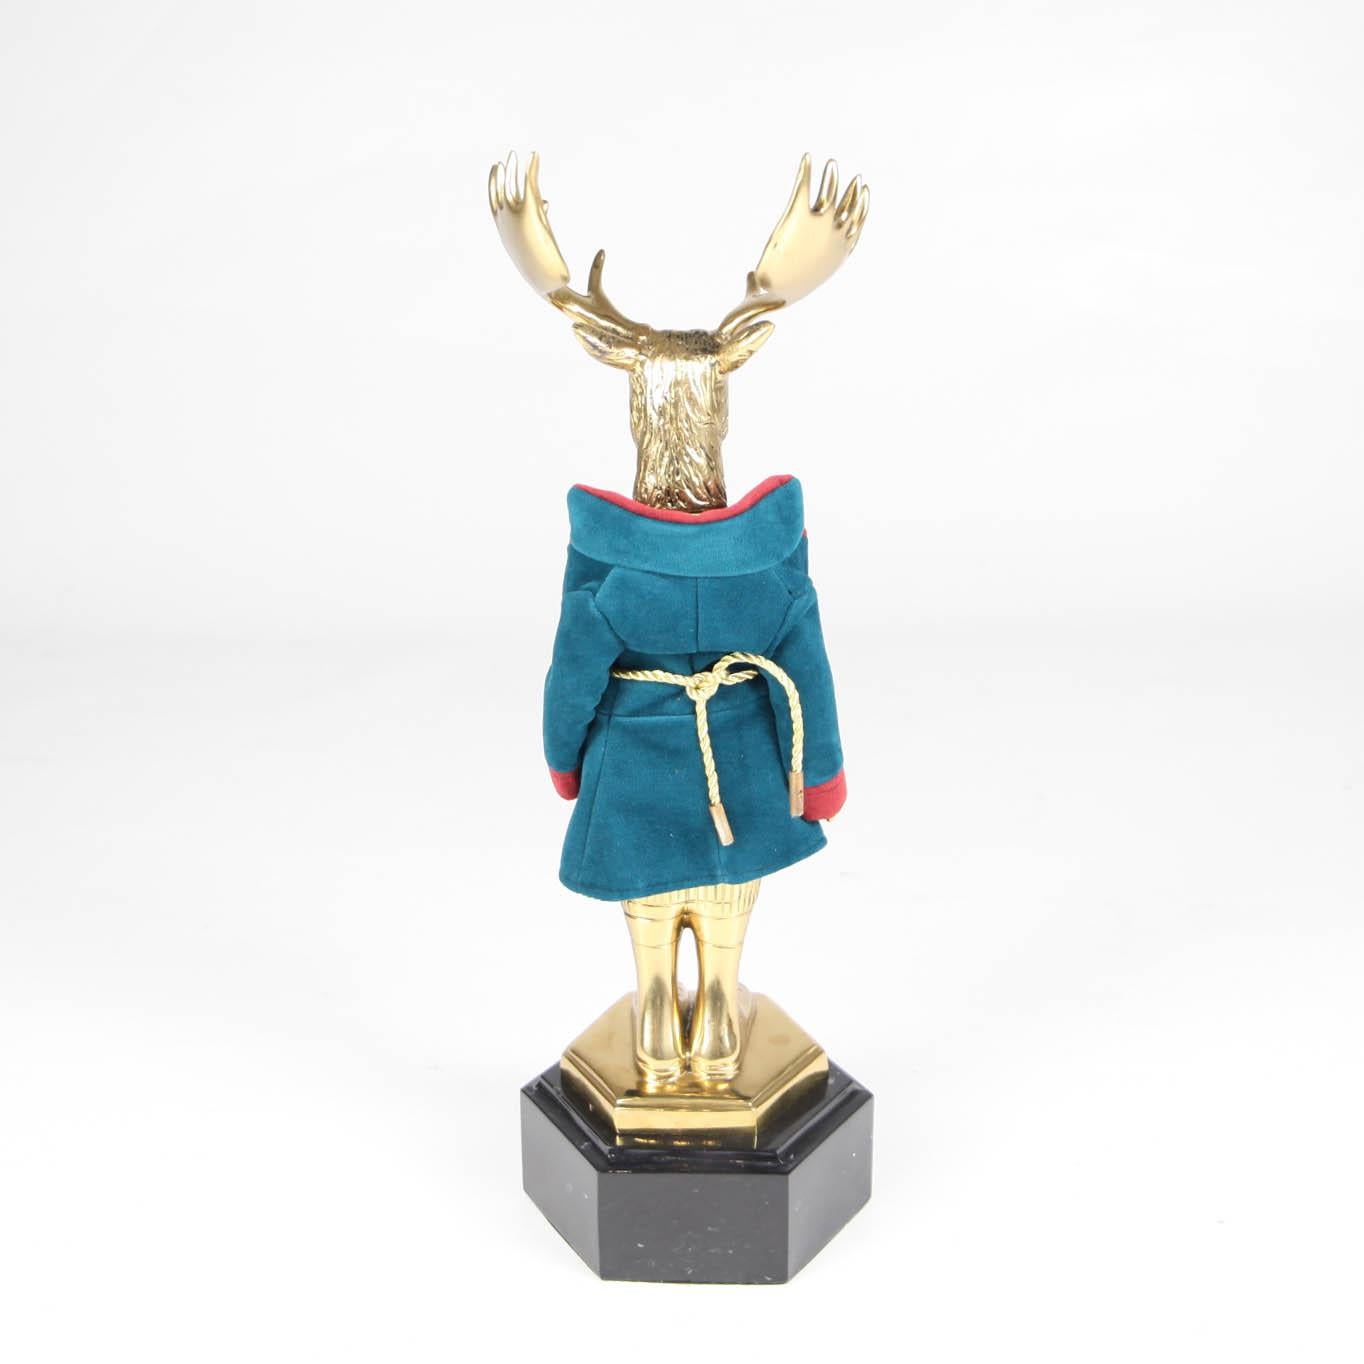 One of a kind Deer brass sculpture with hand made outfit and beautiful marble base. High quality of craftsmanship, excellent condition. 
Corresponding « rabbit » sculpture to make a pair for sale here. 